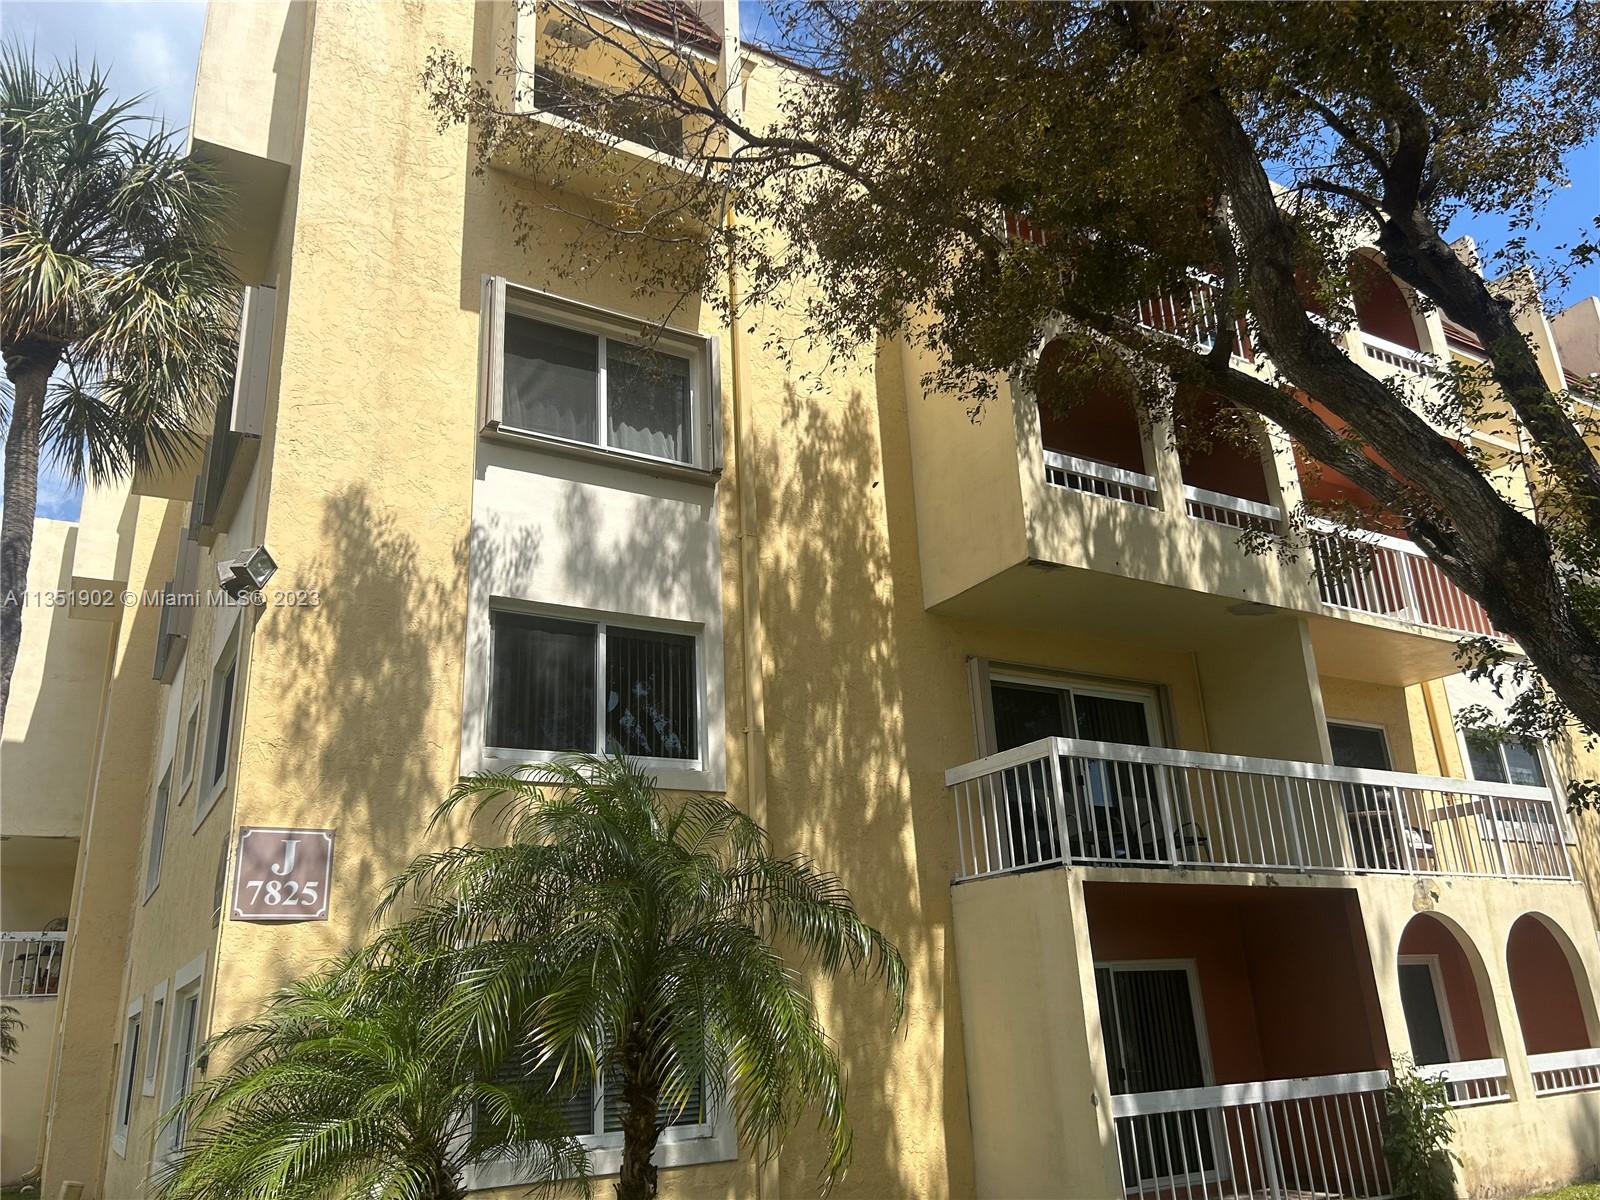 Beautiful 3rd-floor corner unit. Excellent location close to Dadeland Mall, Hospital, US1, etc.  Remodel kitchen, 2 bedrooms 2 baths. Close to clubhouse and pools. 24h security patrol. New impact doors and windows and accordion shutters. Low HOA that includes: Cable Tv, Common Area, Landscaping/Lawn Maintenance, Parking, Recreation Facilities, Sewer, Trash Removal, Water, Gym, pool, Tennis and Racquetball courts. The building has an elevator.